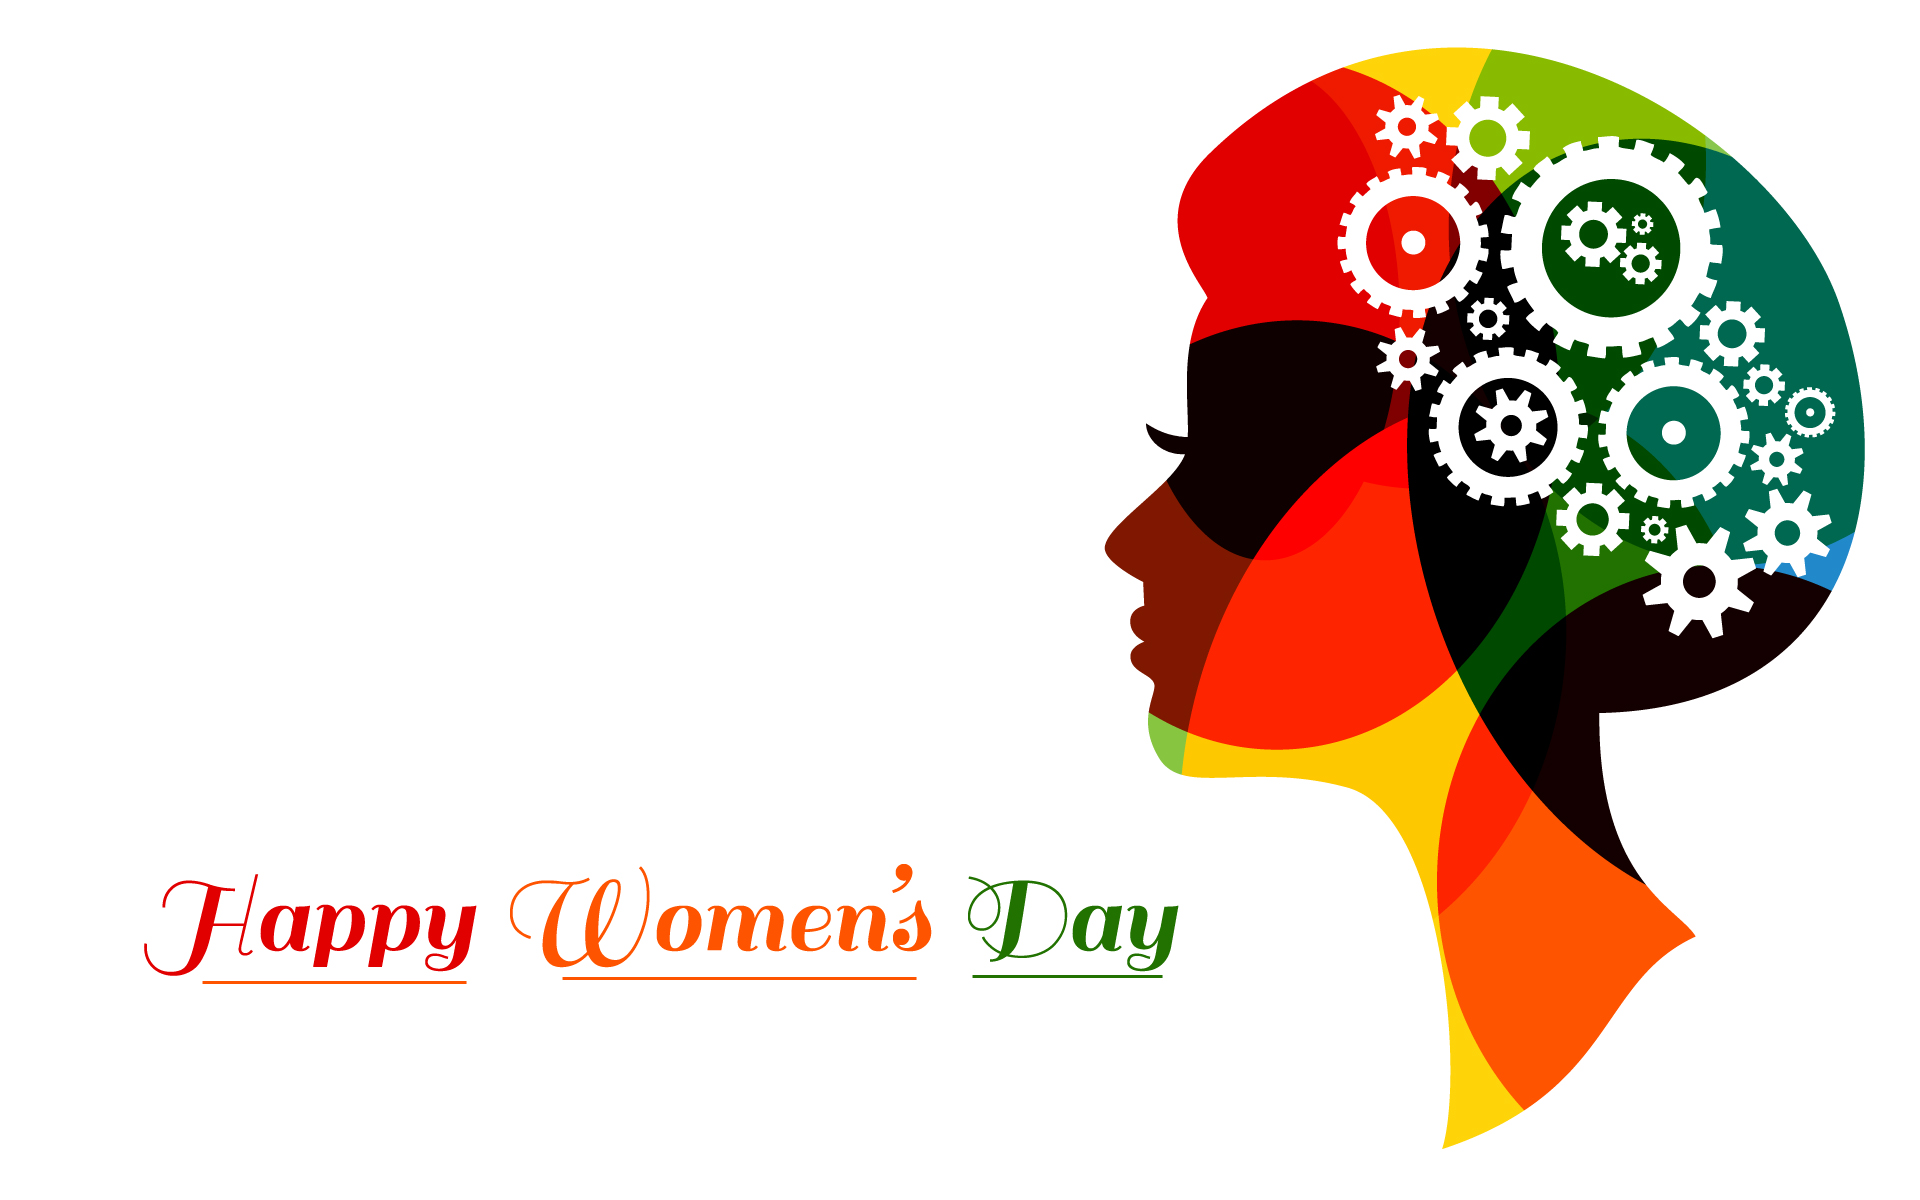 Top 21} Happy Women's Day Wishes - Quotes and Sayings